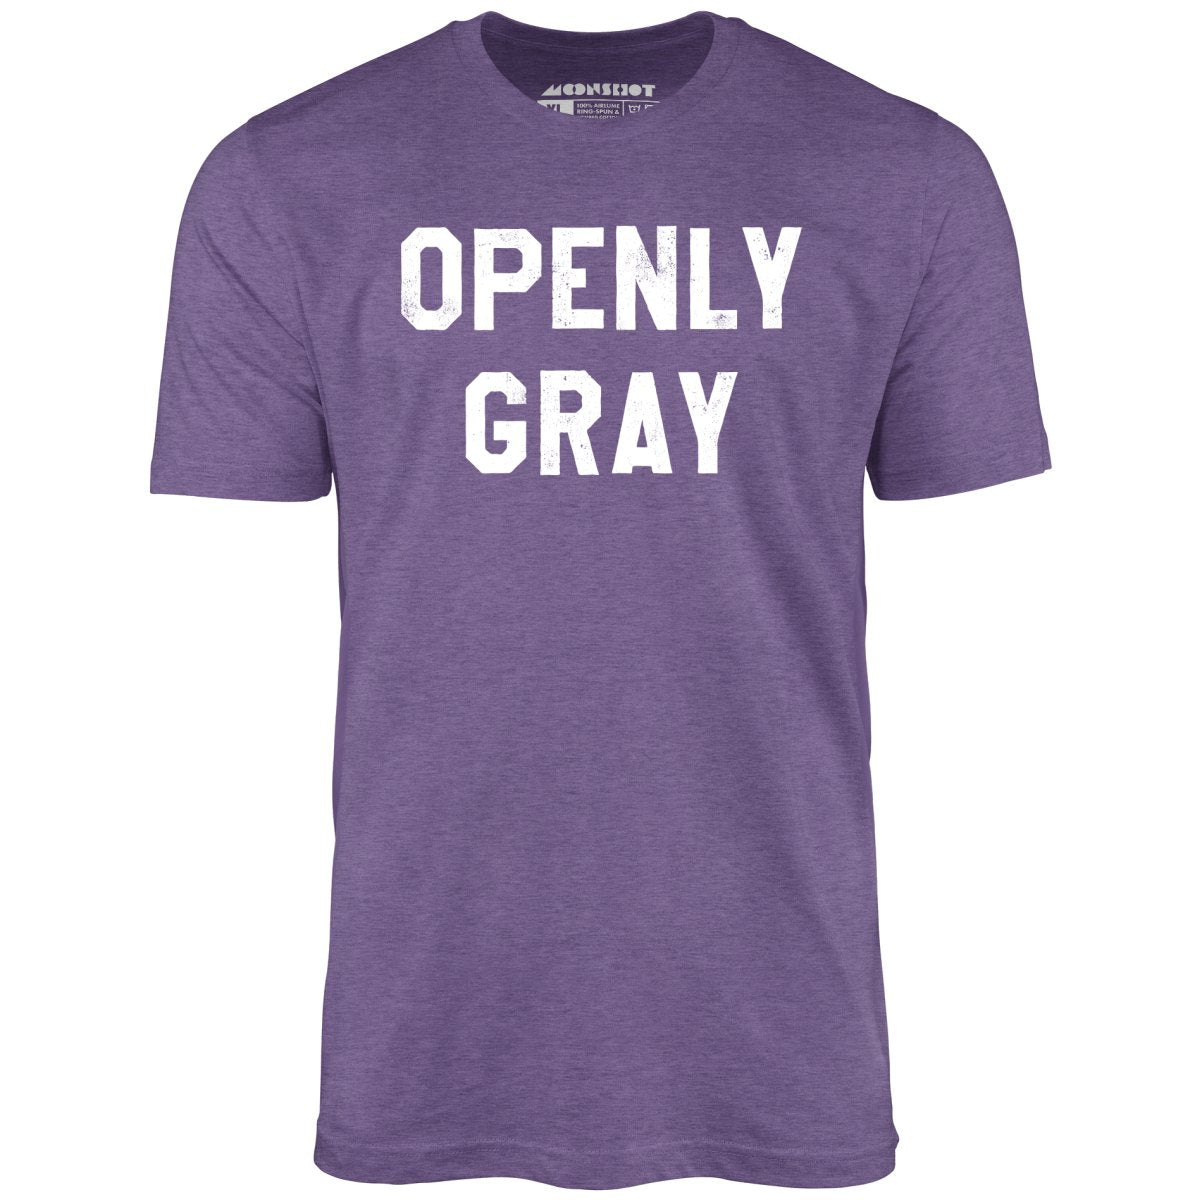 Openly Gray - Unisex T-Shirt